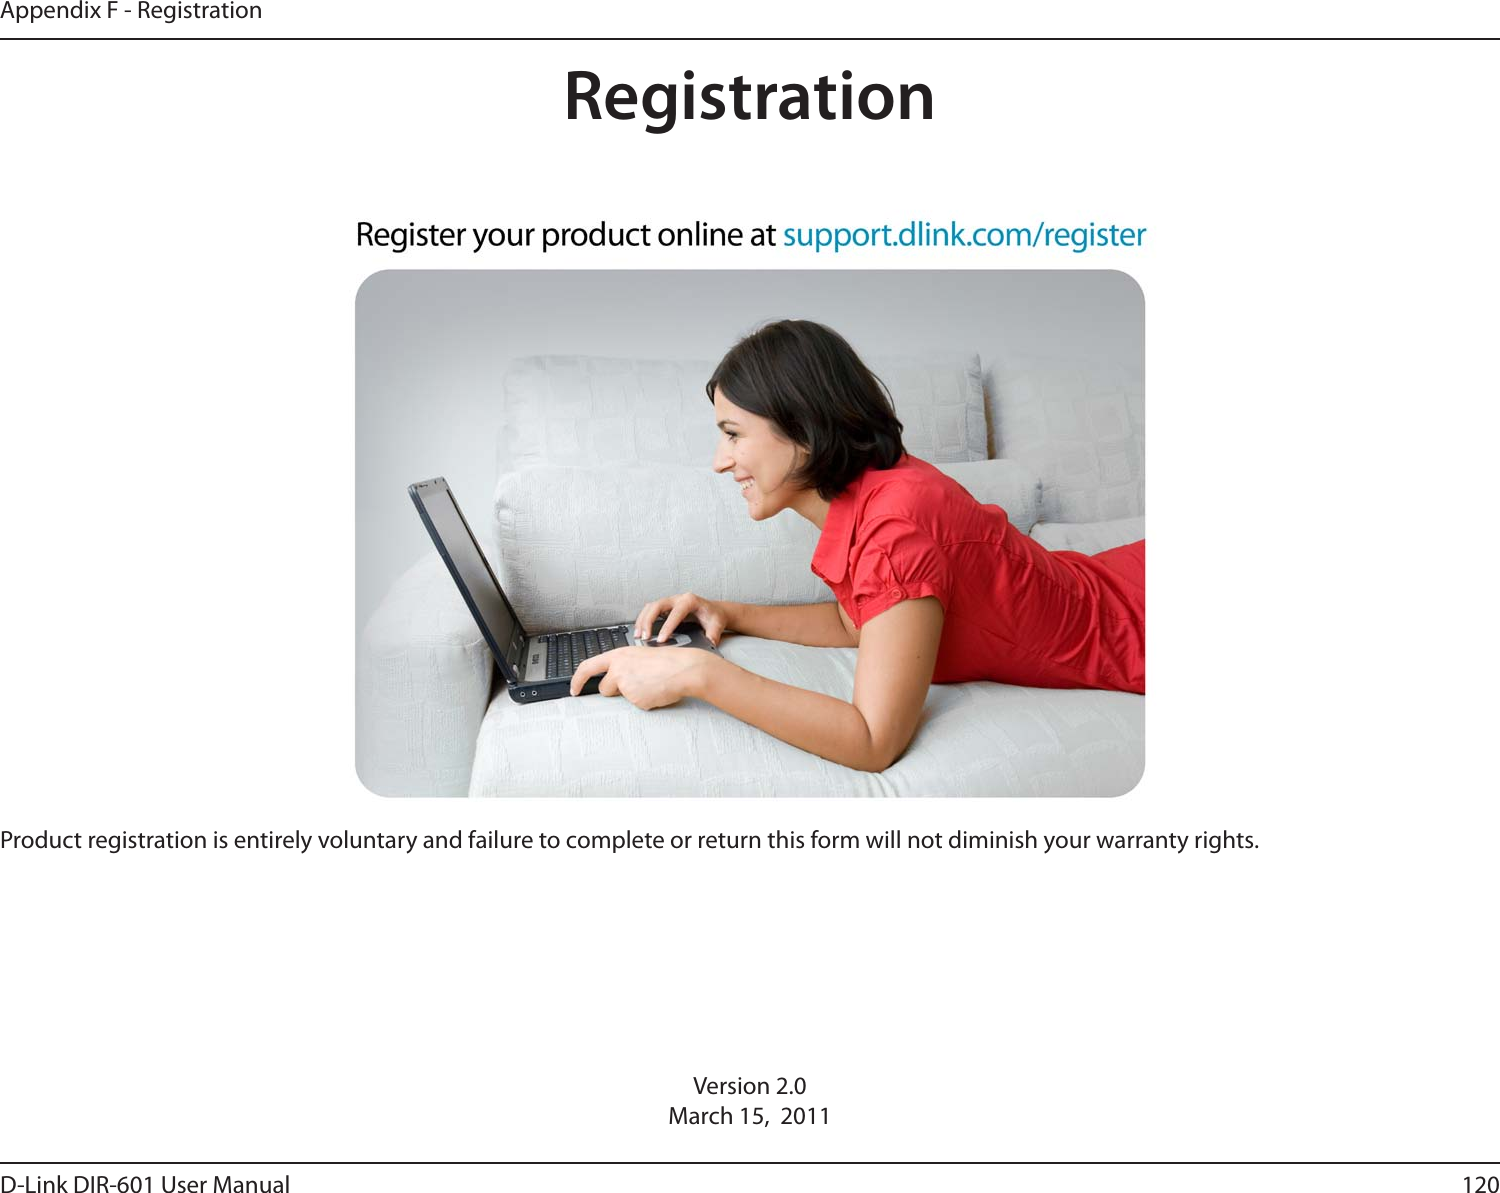 120D-Link DIR-601 User ManualAppendix F - RegistrationVersion 2.0March 15,  2011Product registration is entirely voluntary and failure to complete or return this form will not diminish your warranty rights.Registration